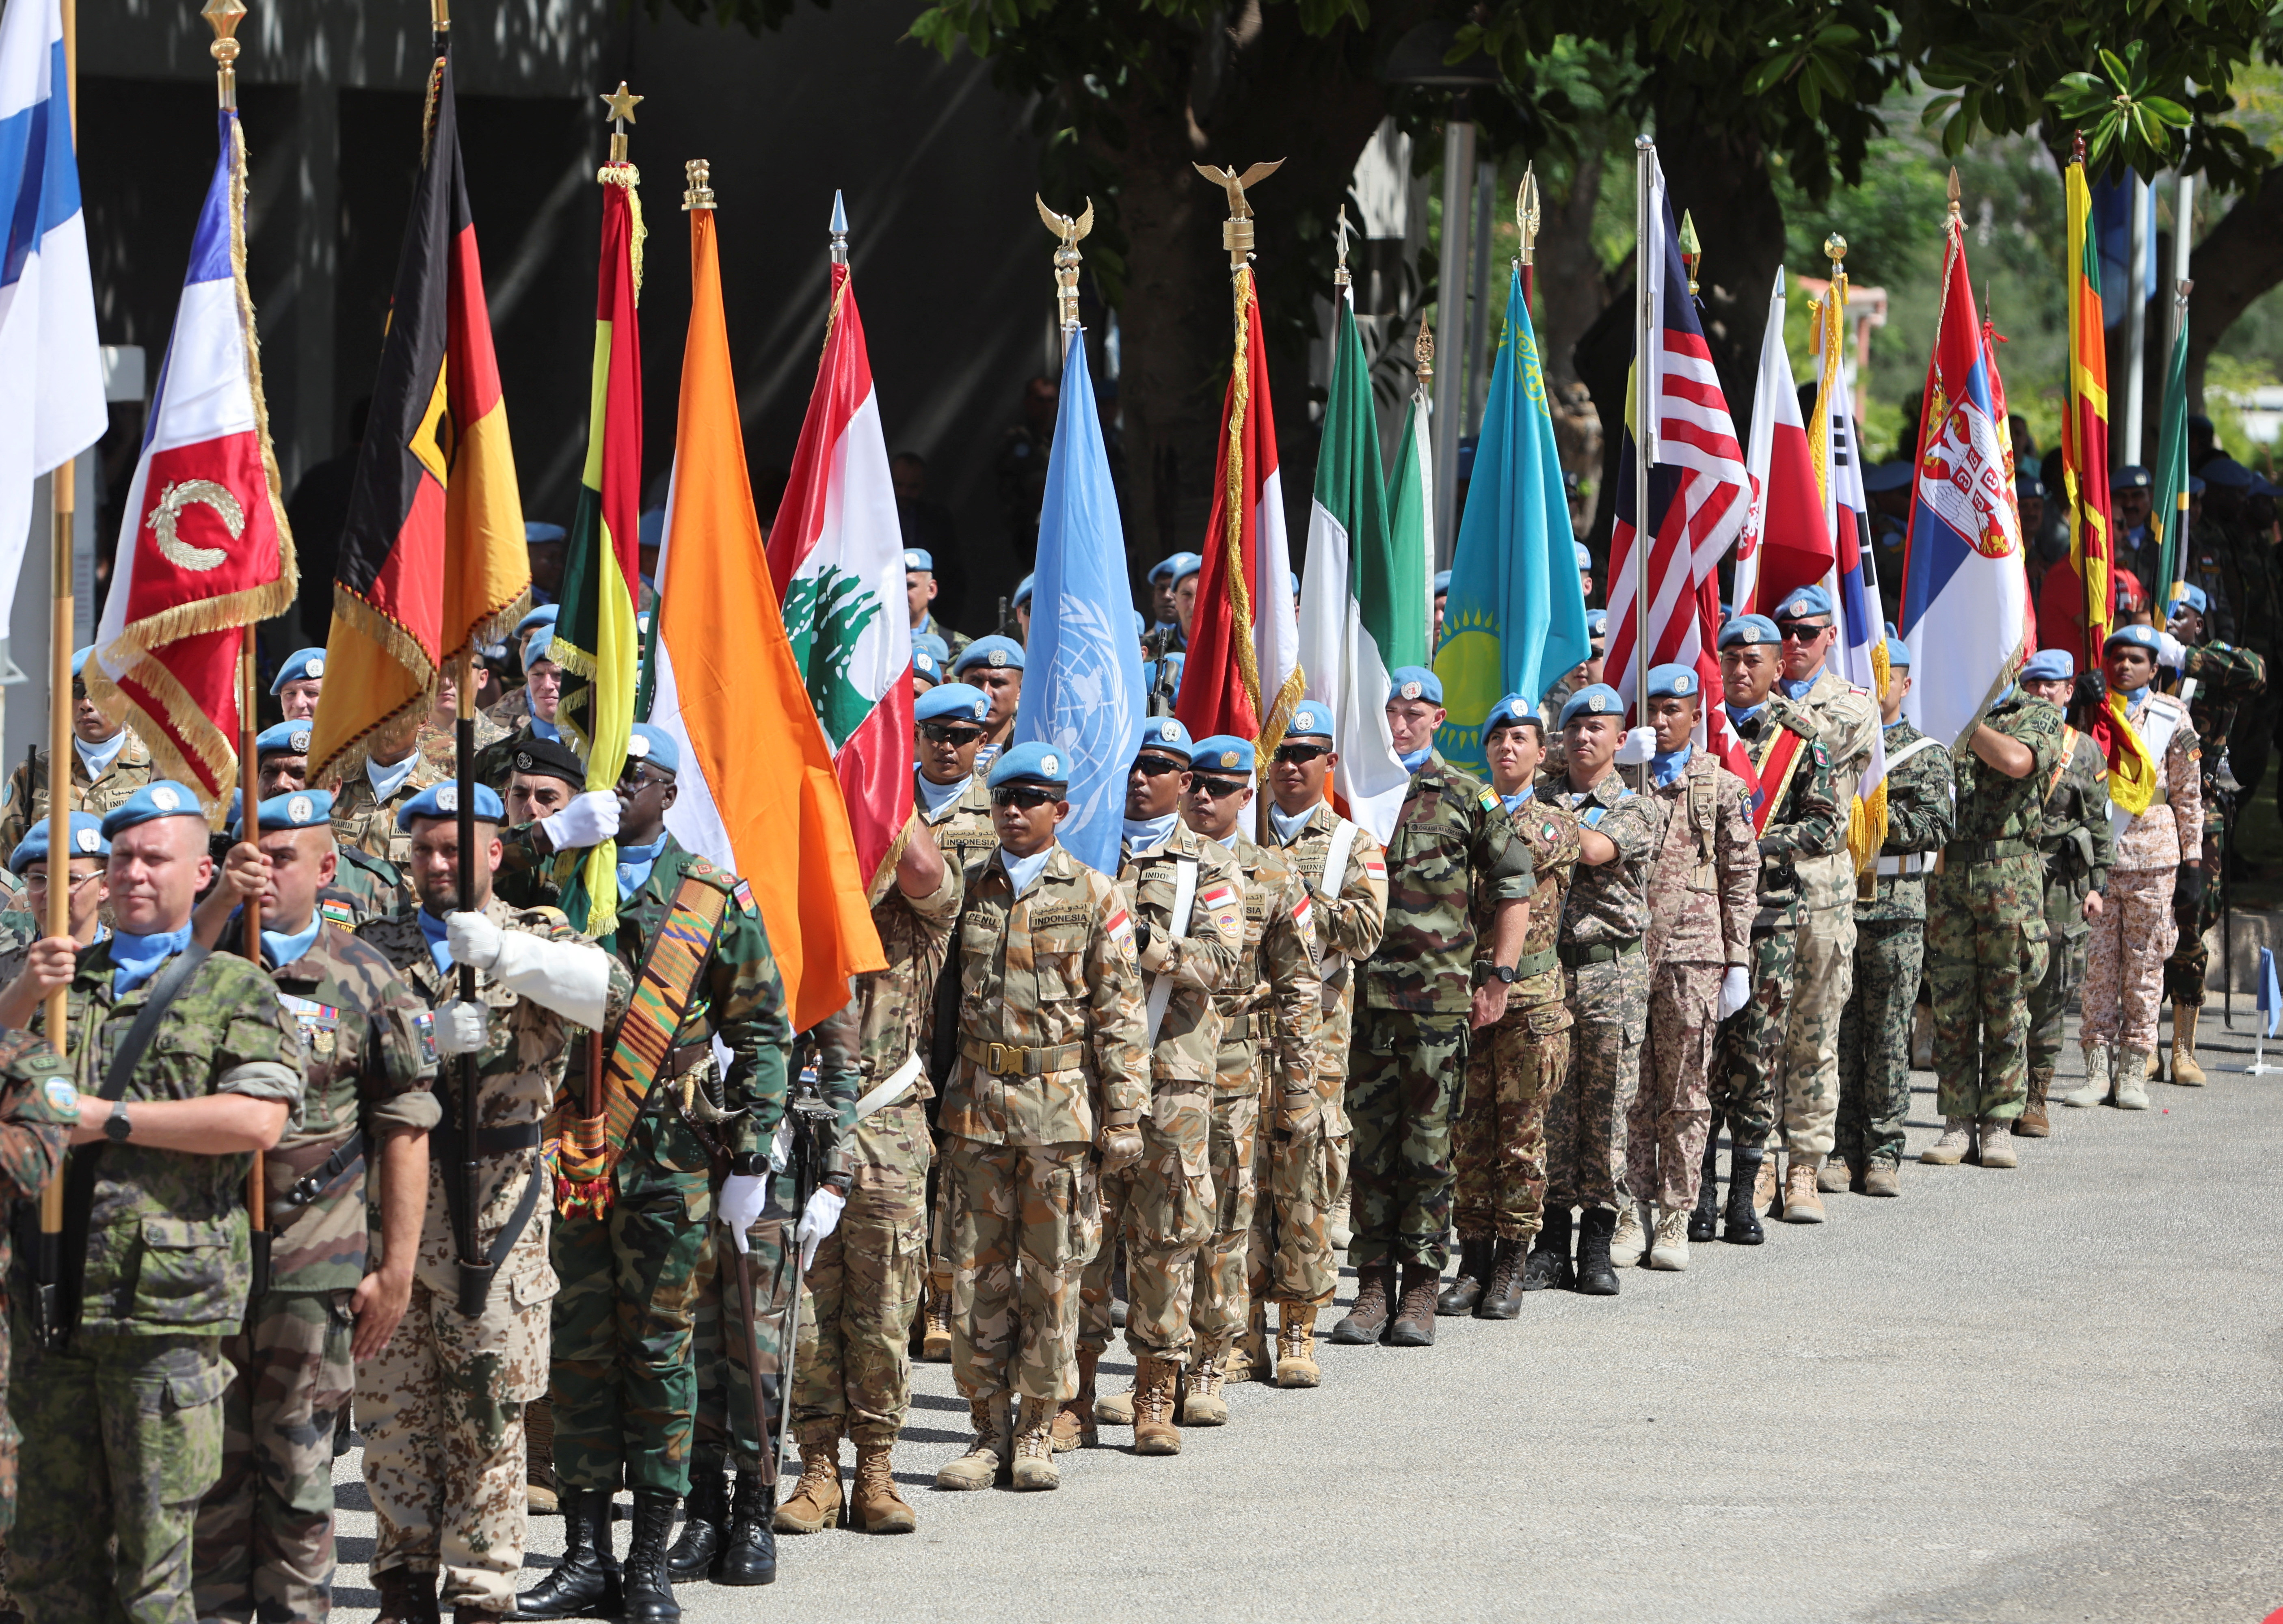 United Nations peacekeepers (UNIFIL) attend a ceremony to mark the International Day of Peace in Naqoura, near the Lebanese-Israeli border, southern Lebanon, September 21, 2022. REUTERS/Aziz Taher